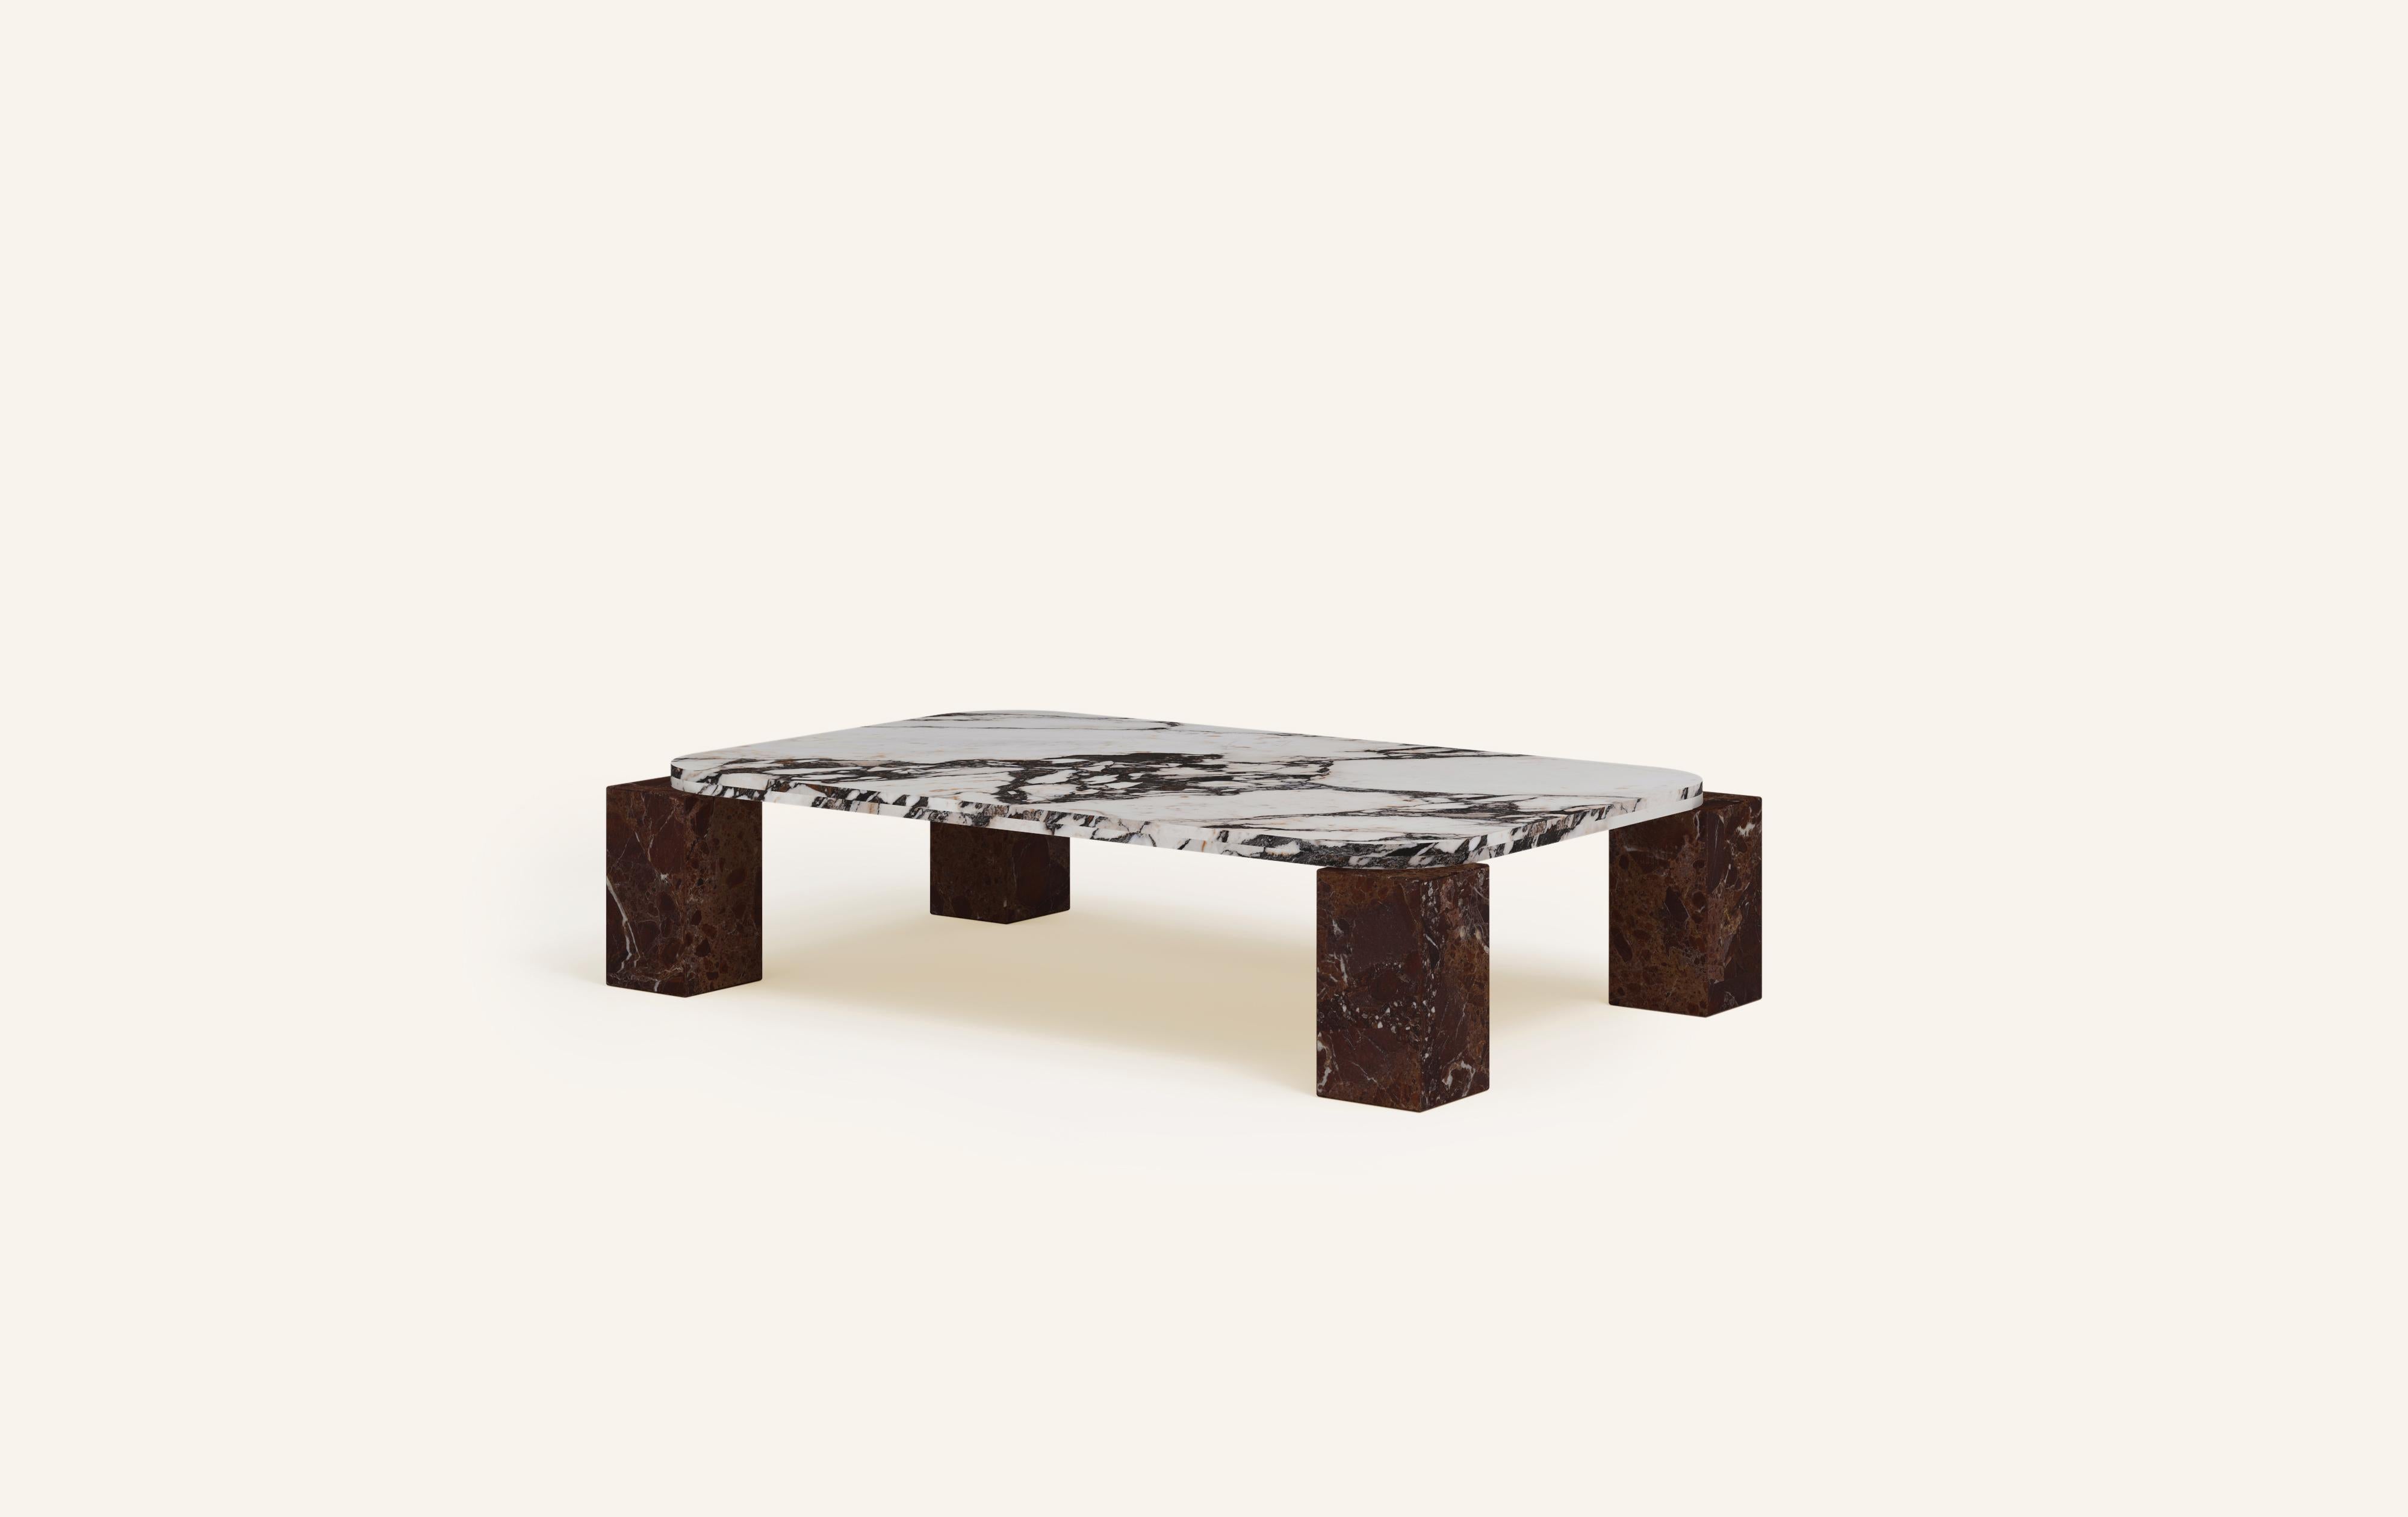 Organic Modern FORM(LA) Cubo Rectangle Coffee Table 50”L x 32”W x 14”H Viola & Rosso Marble For Sale